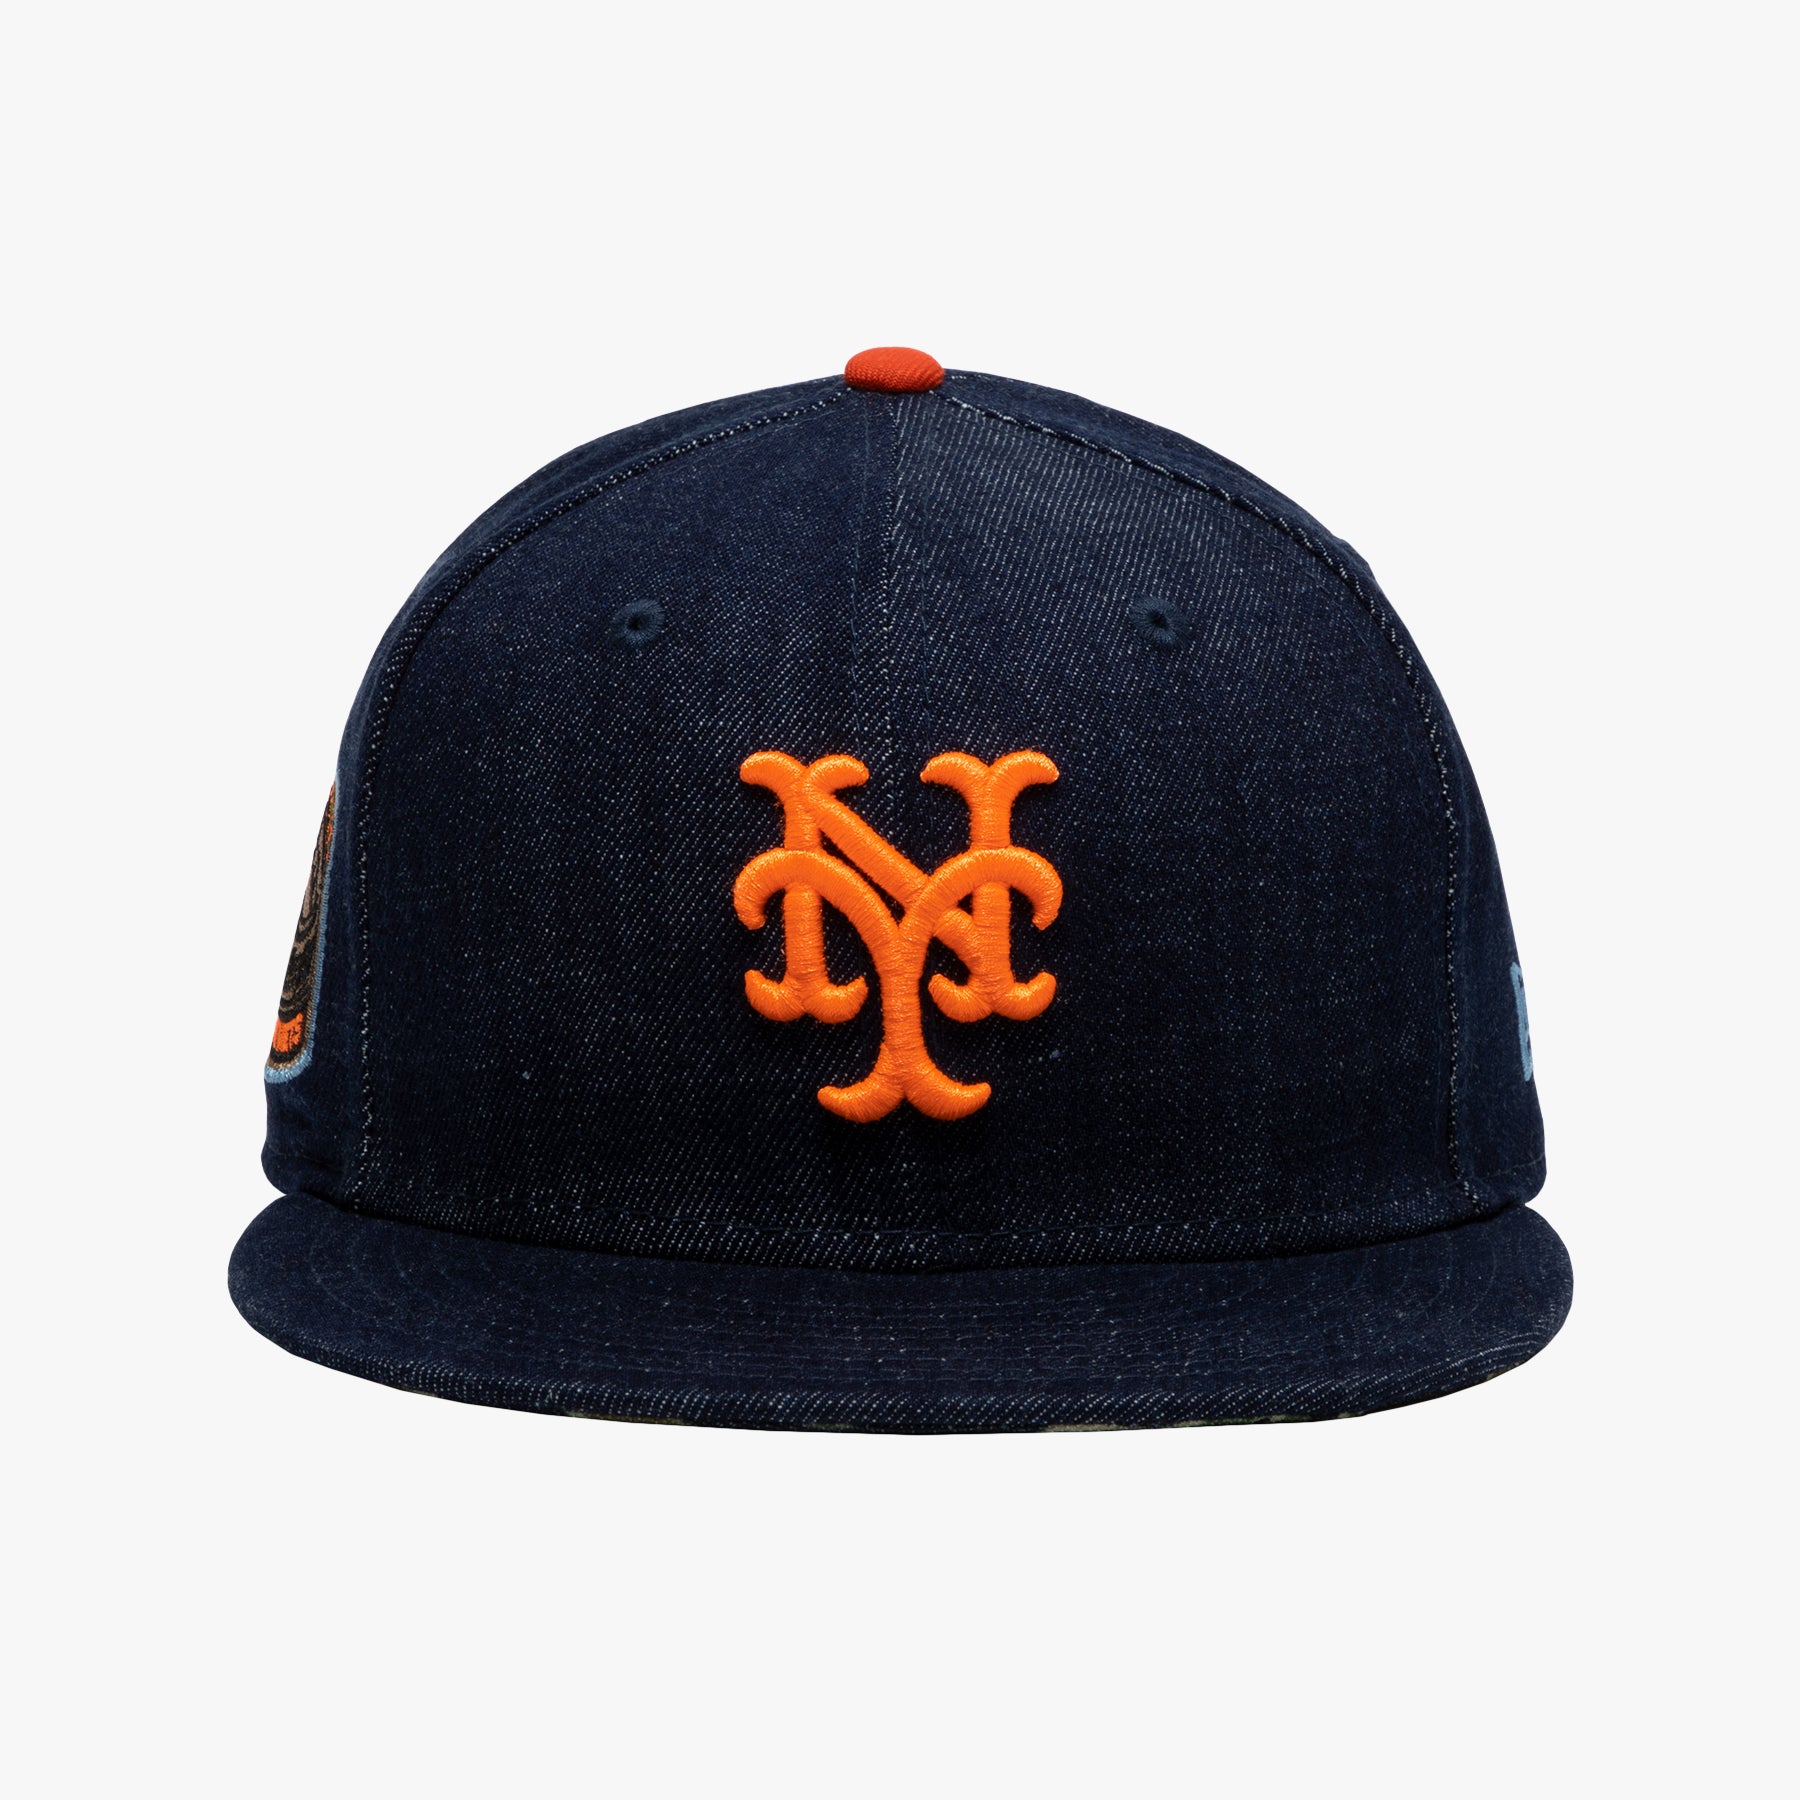 Concepts x New Era 59Fifty Fitted Hat